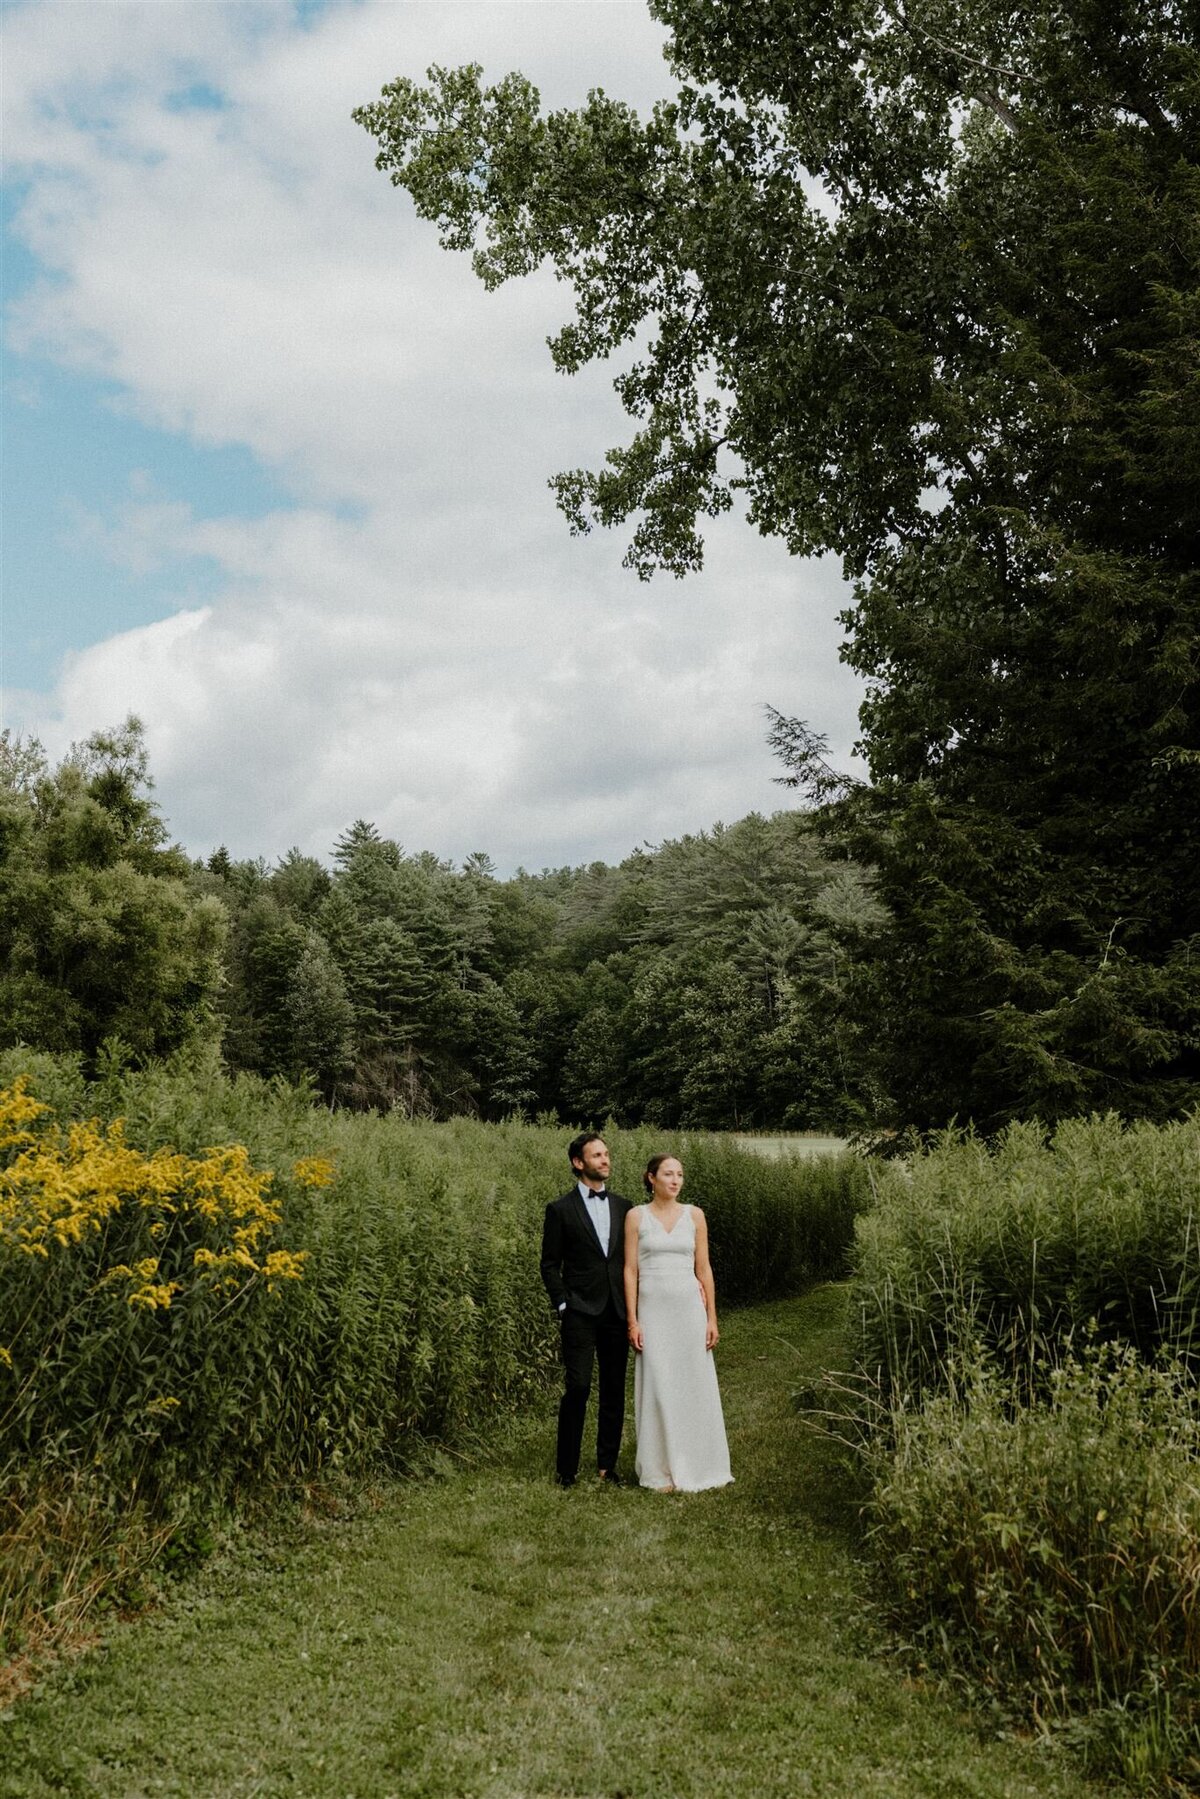 wedding couples photos in field